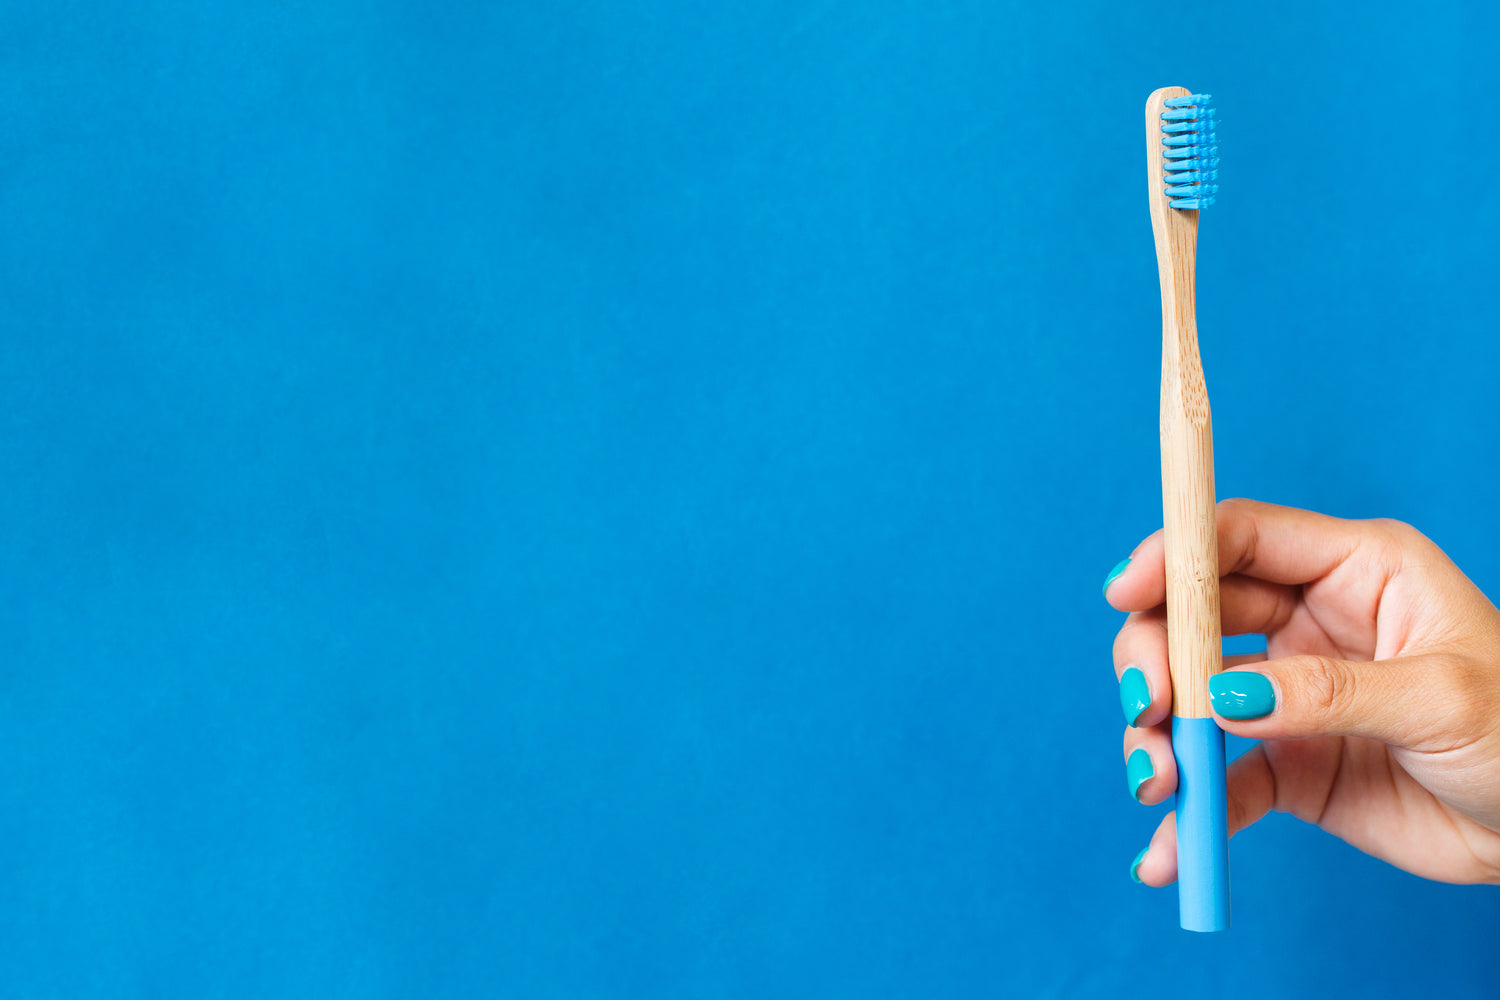 HOW TO CARE FOR YOUR BAMBOO TOOTHBRUSH